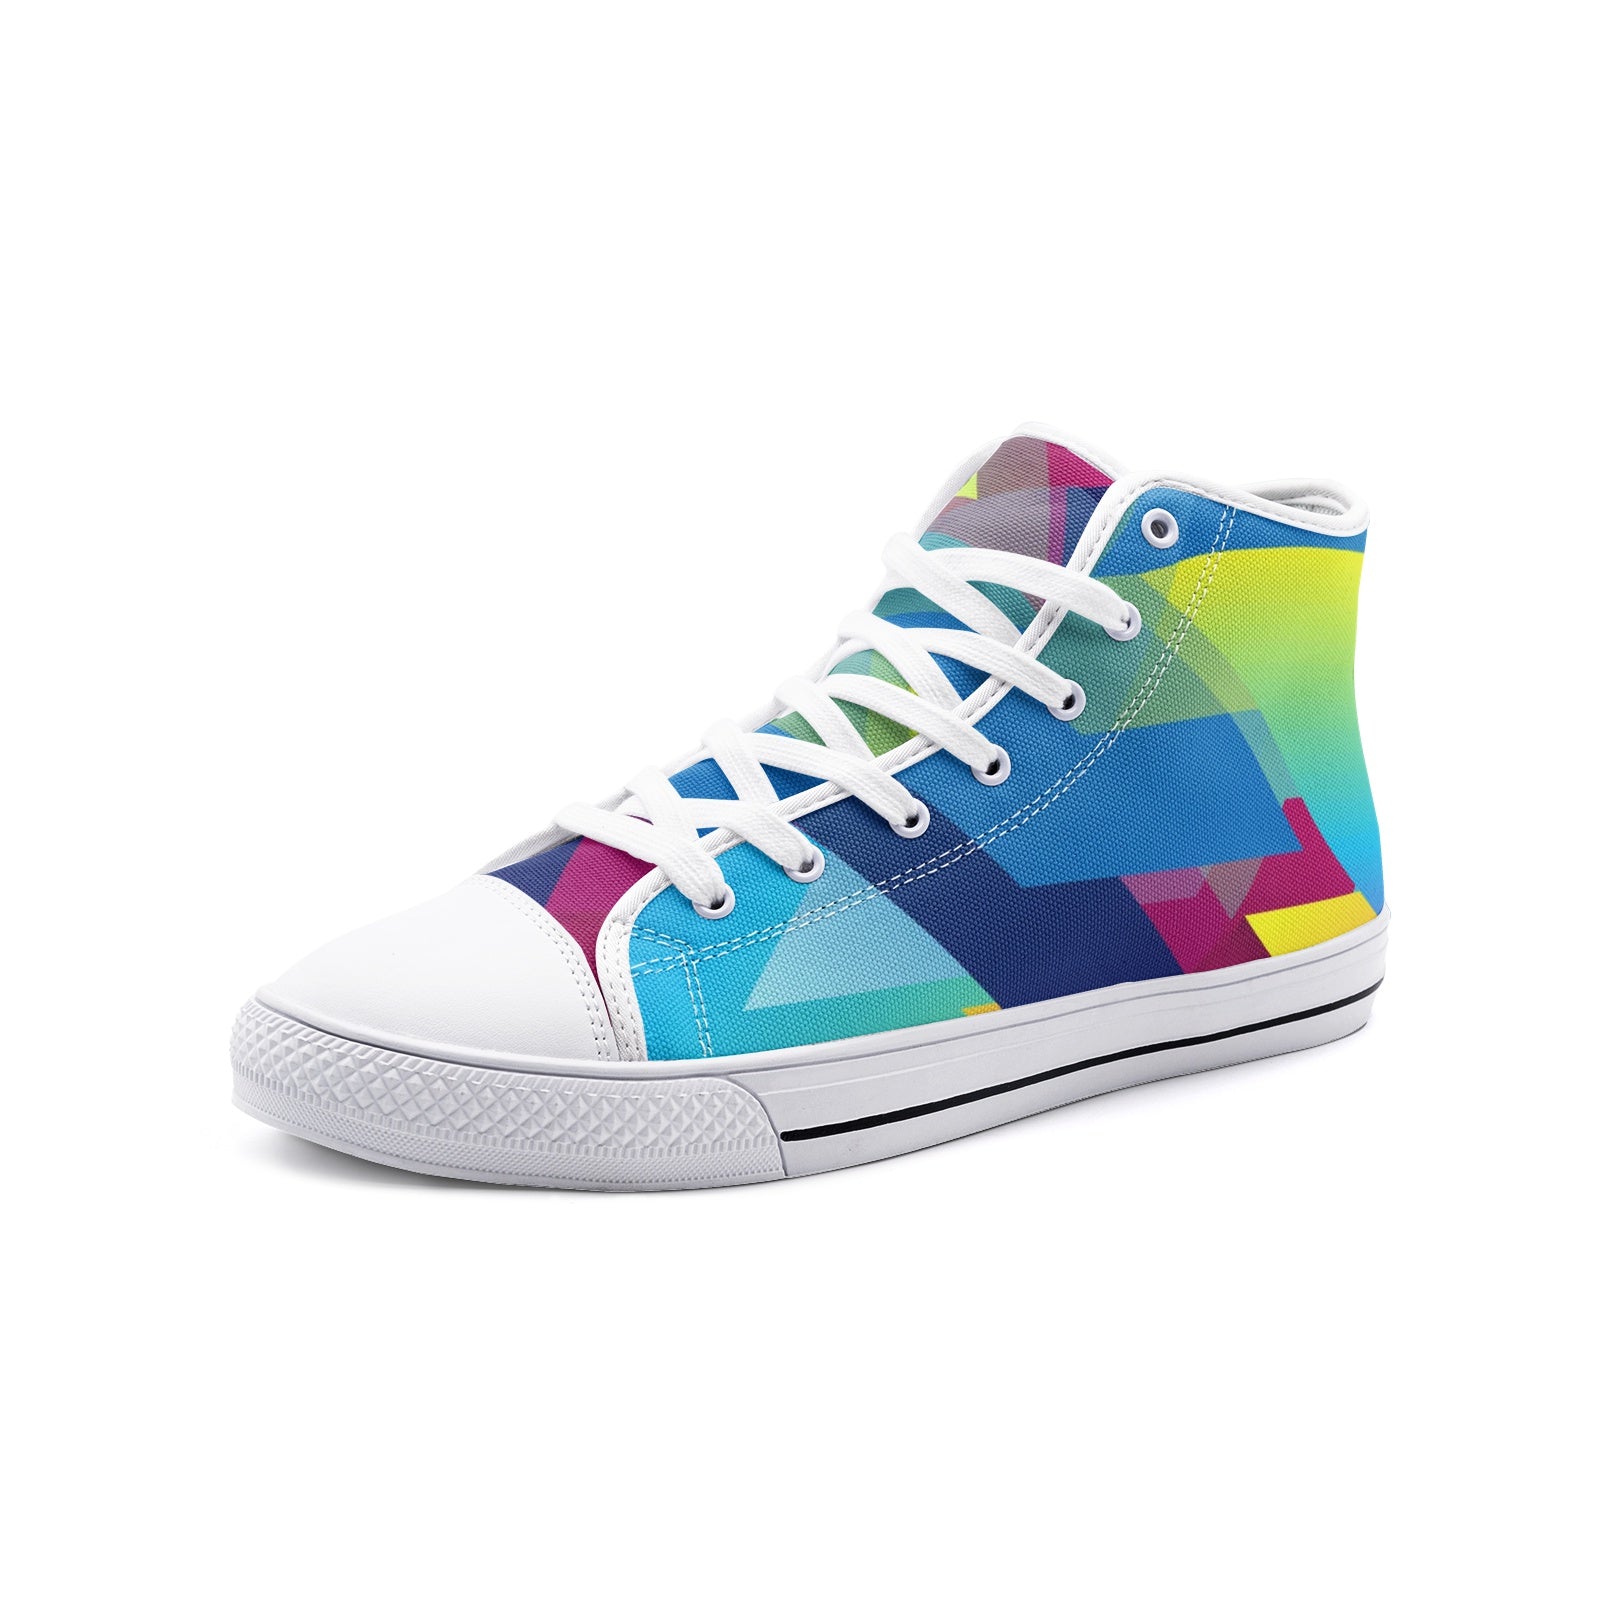 Abstract Colorful Triangles Unisex High-Top Canvas Shoes DromedarShop.com Online Boutique